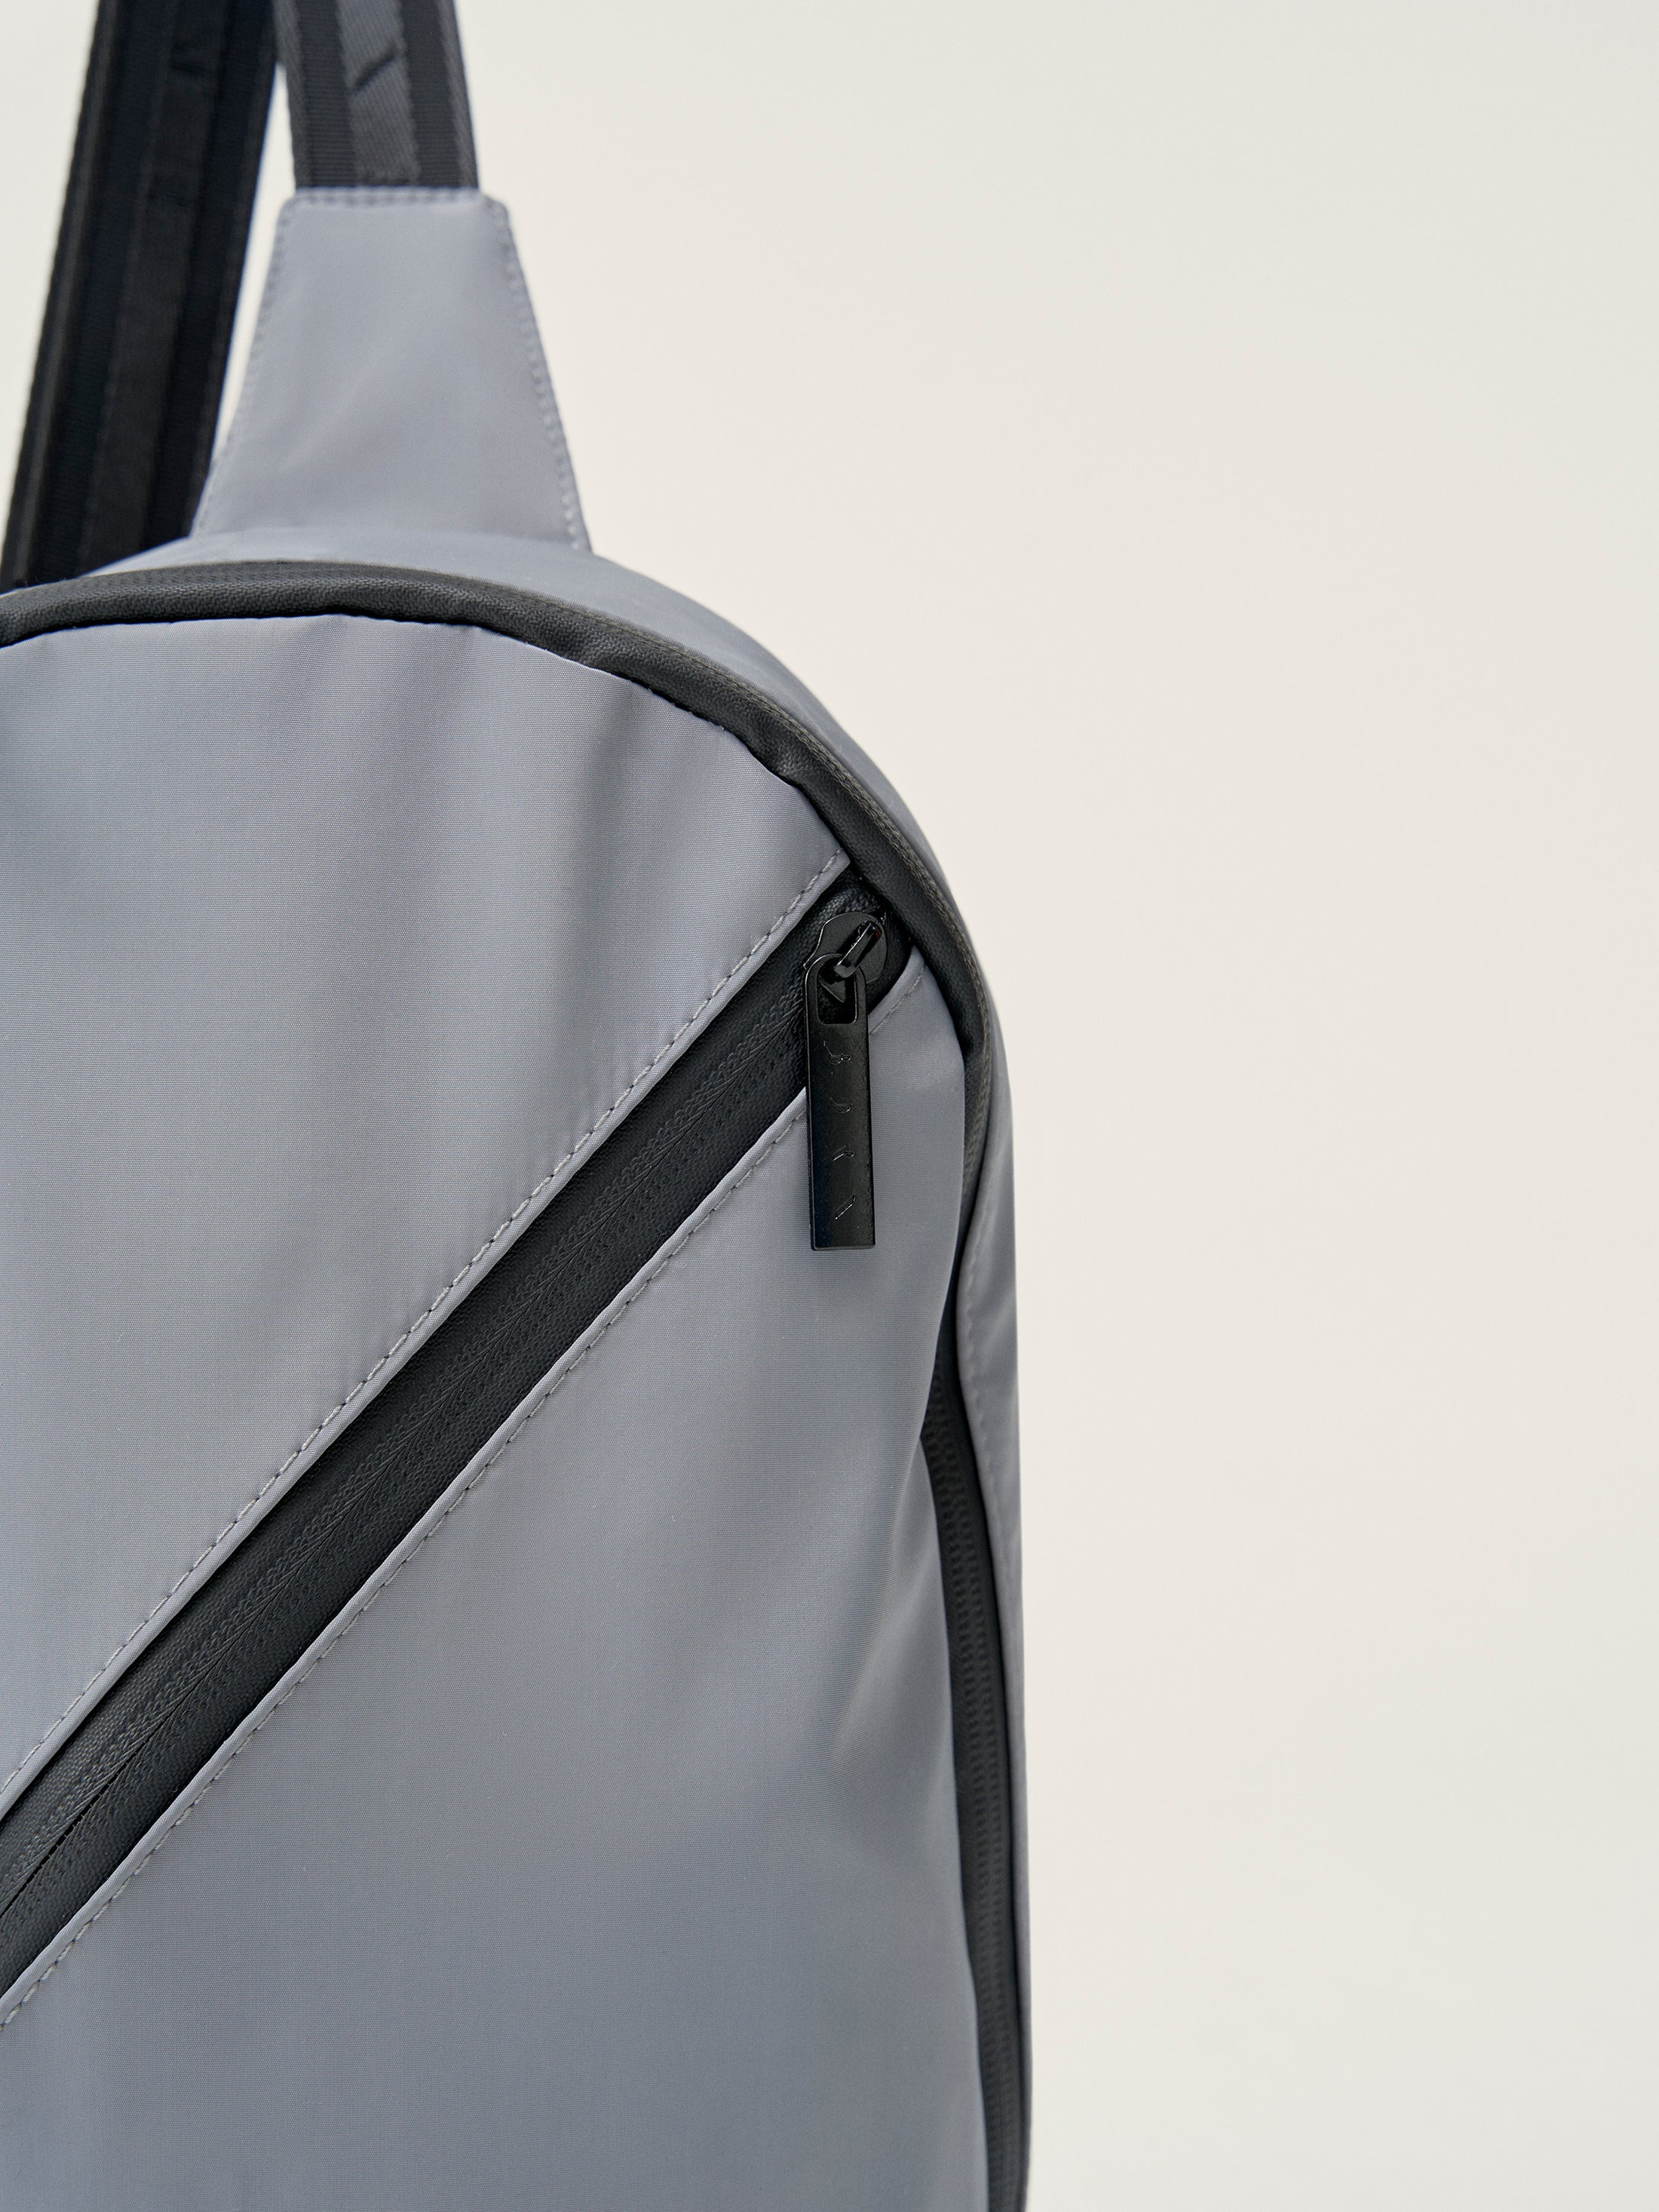 Stow Bag in Light Grey